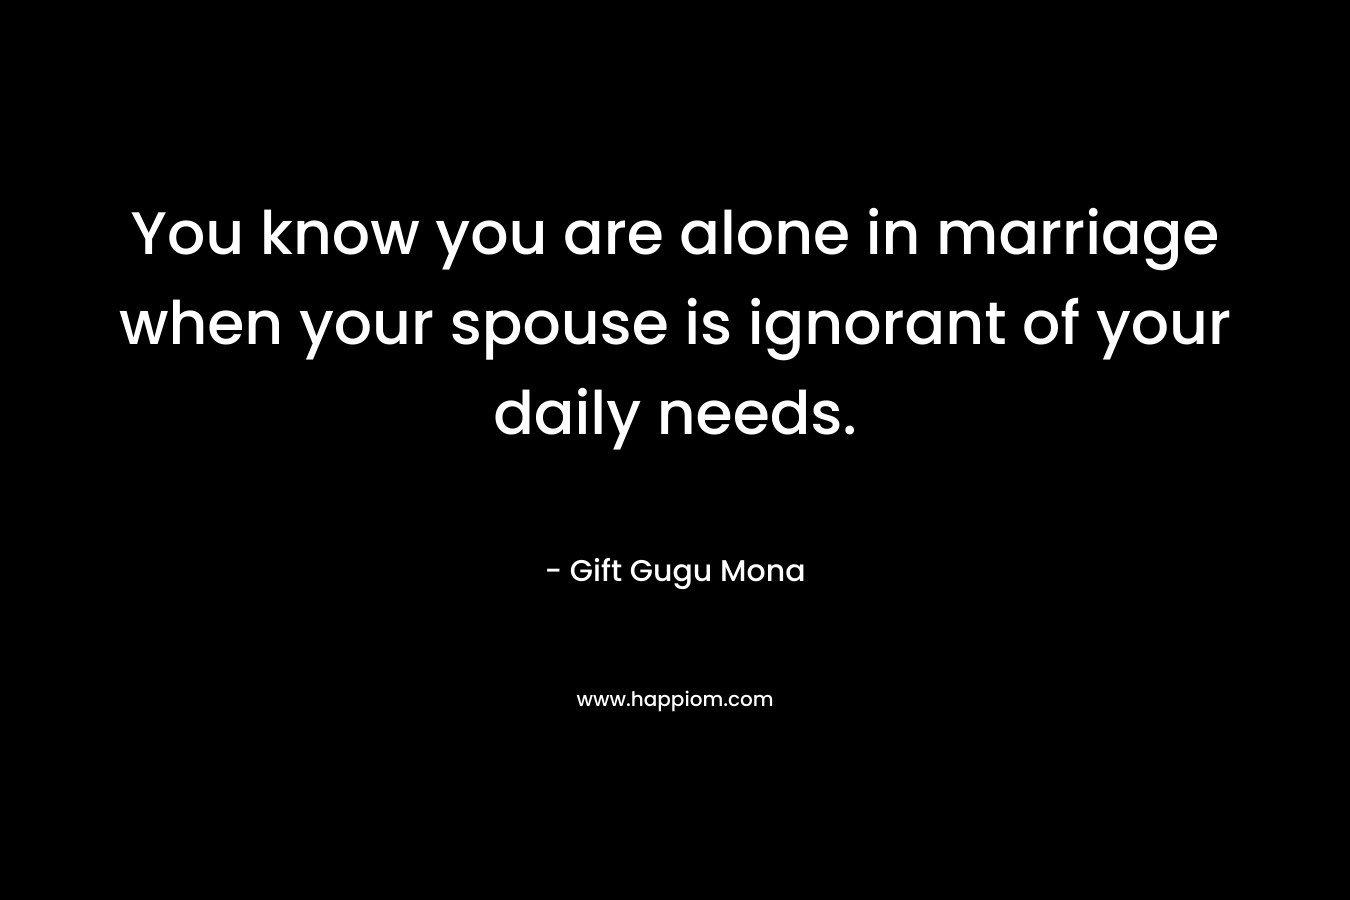 You know you are alone in marriage when your spouse is ignorant of your daily needs.